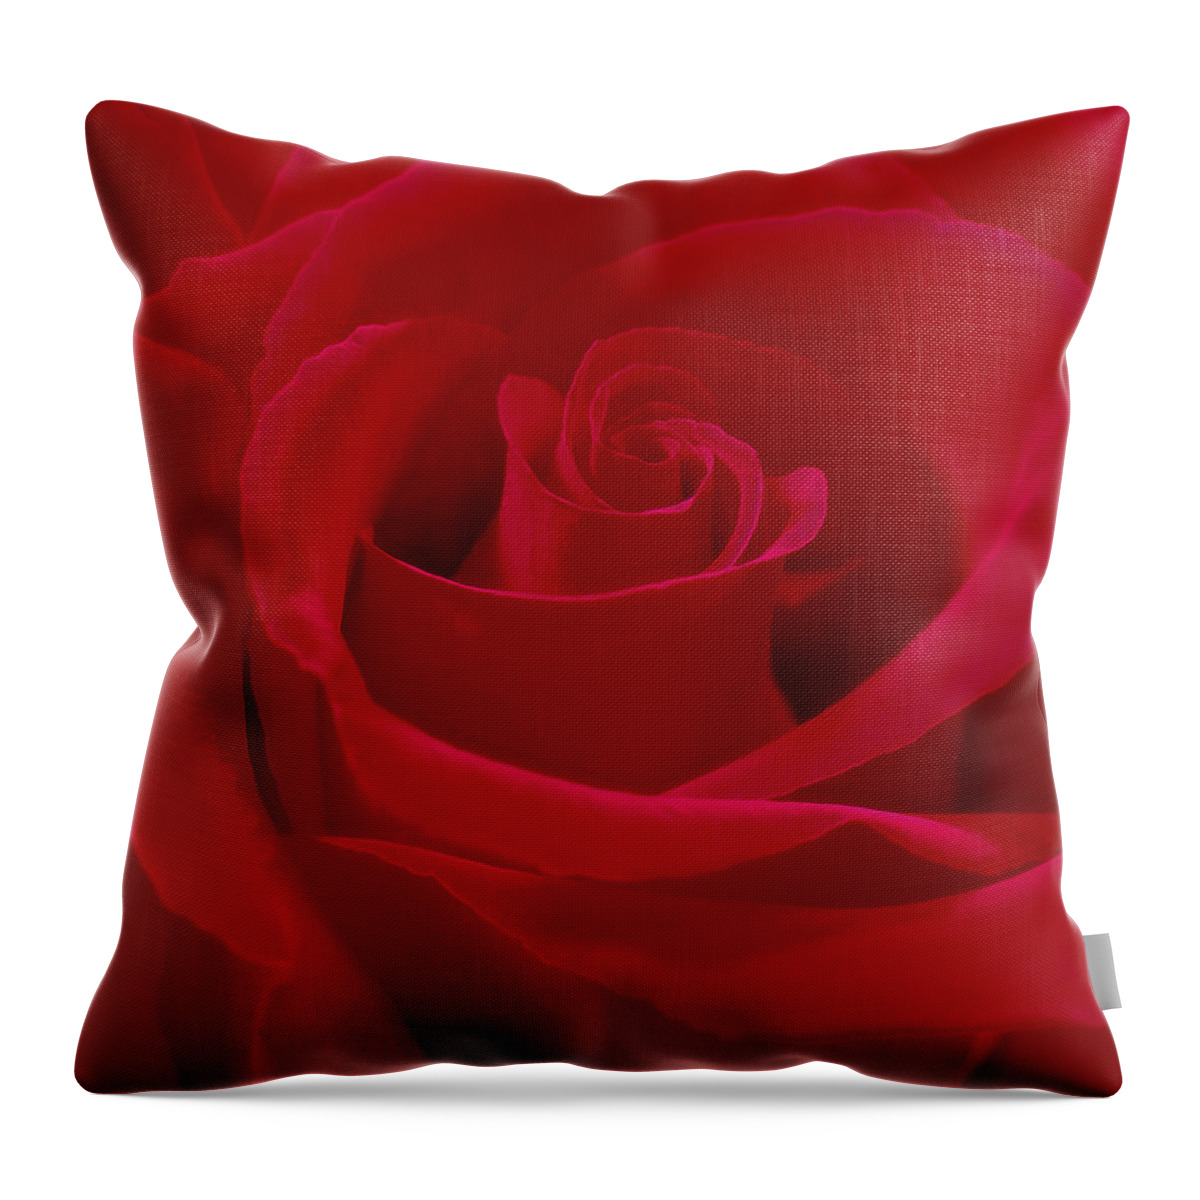 Red Rose Throw Pillow featuring the photograph Deep Red Rose by Mike McGlothlen